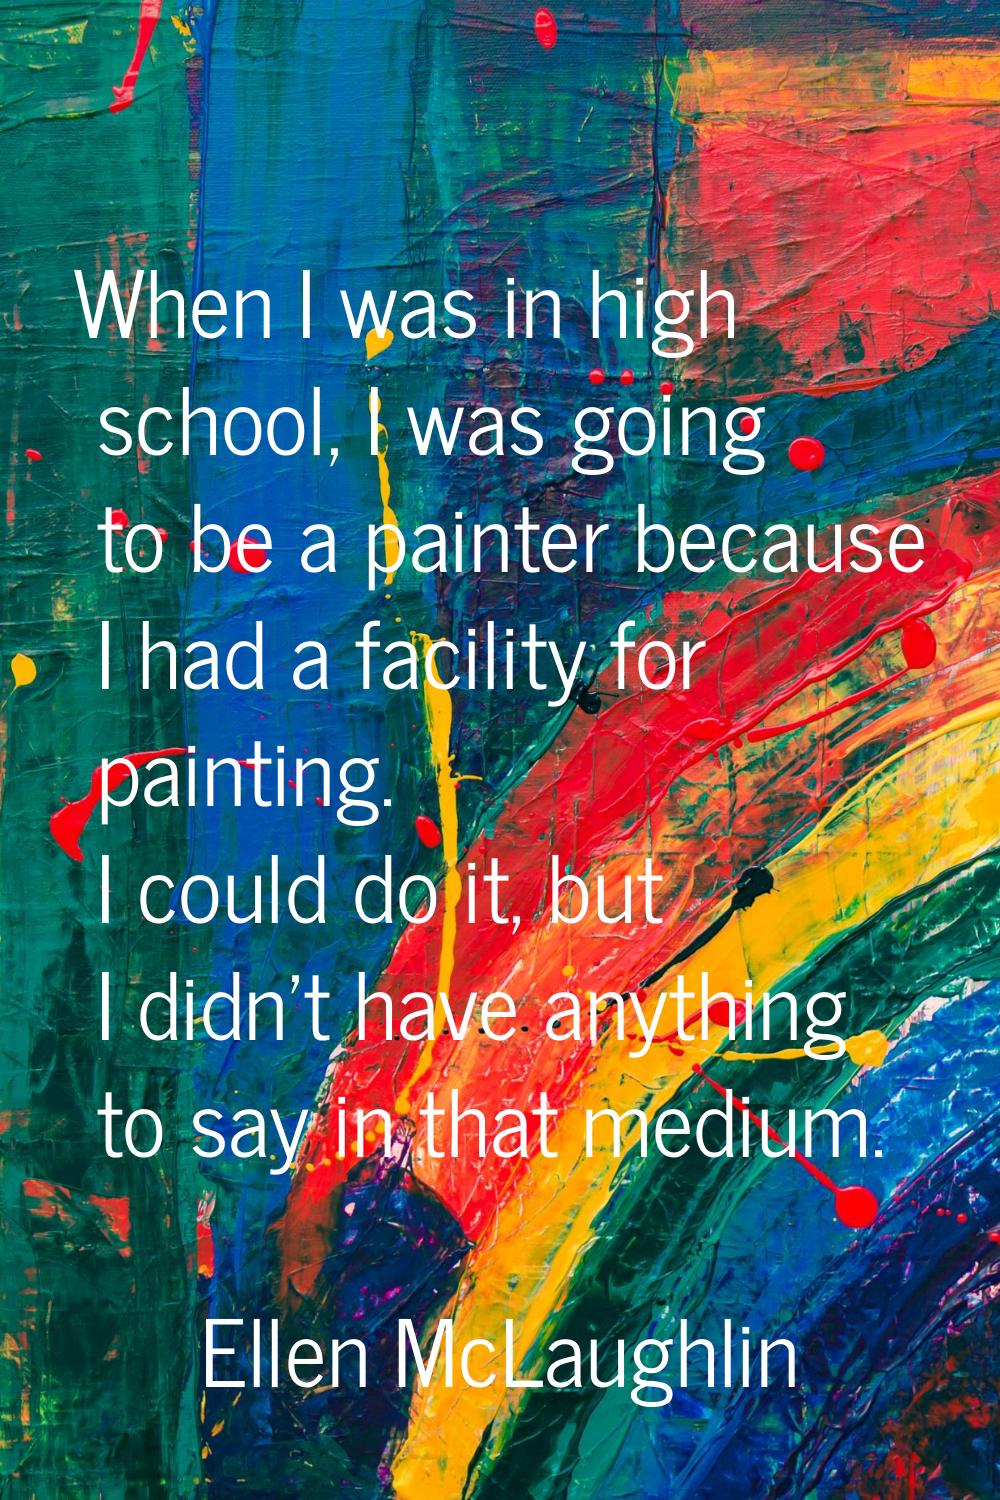 When I was in high school, I was going to be a painter because I had a facility for painting. I cou